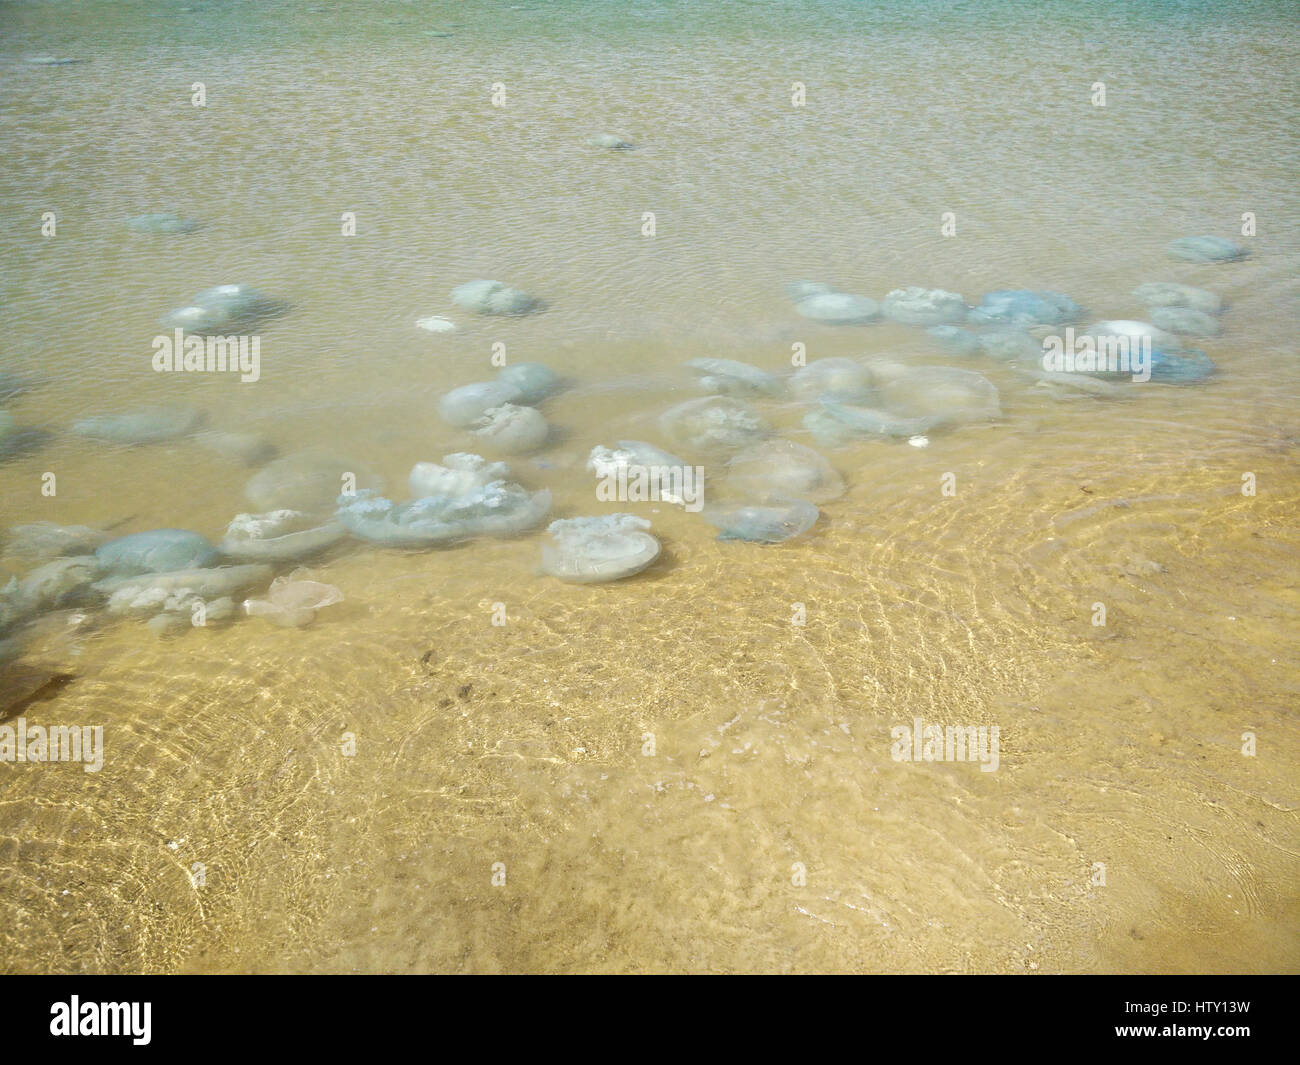 Jellyfish washed onto the beach. Photographed in Haifa, Israel Stock Photo